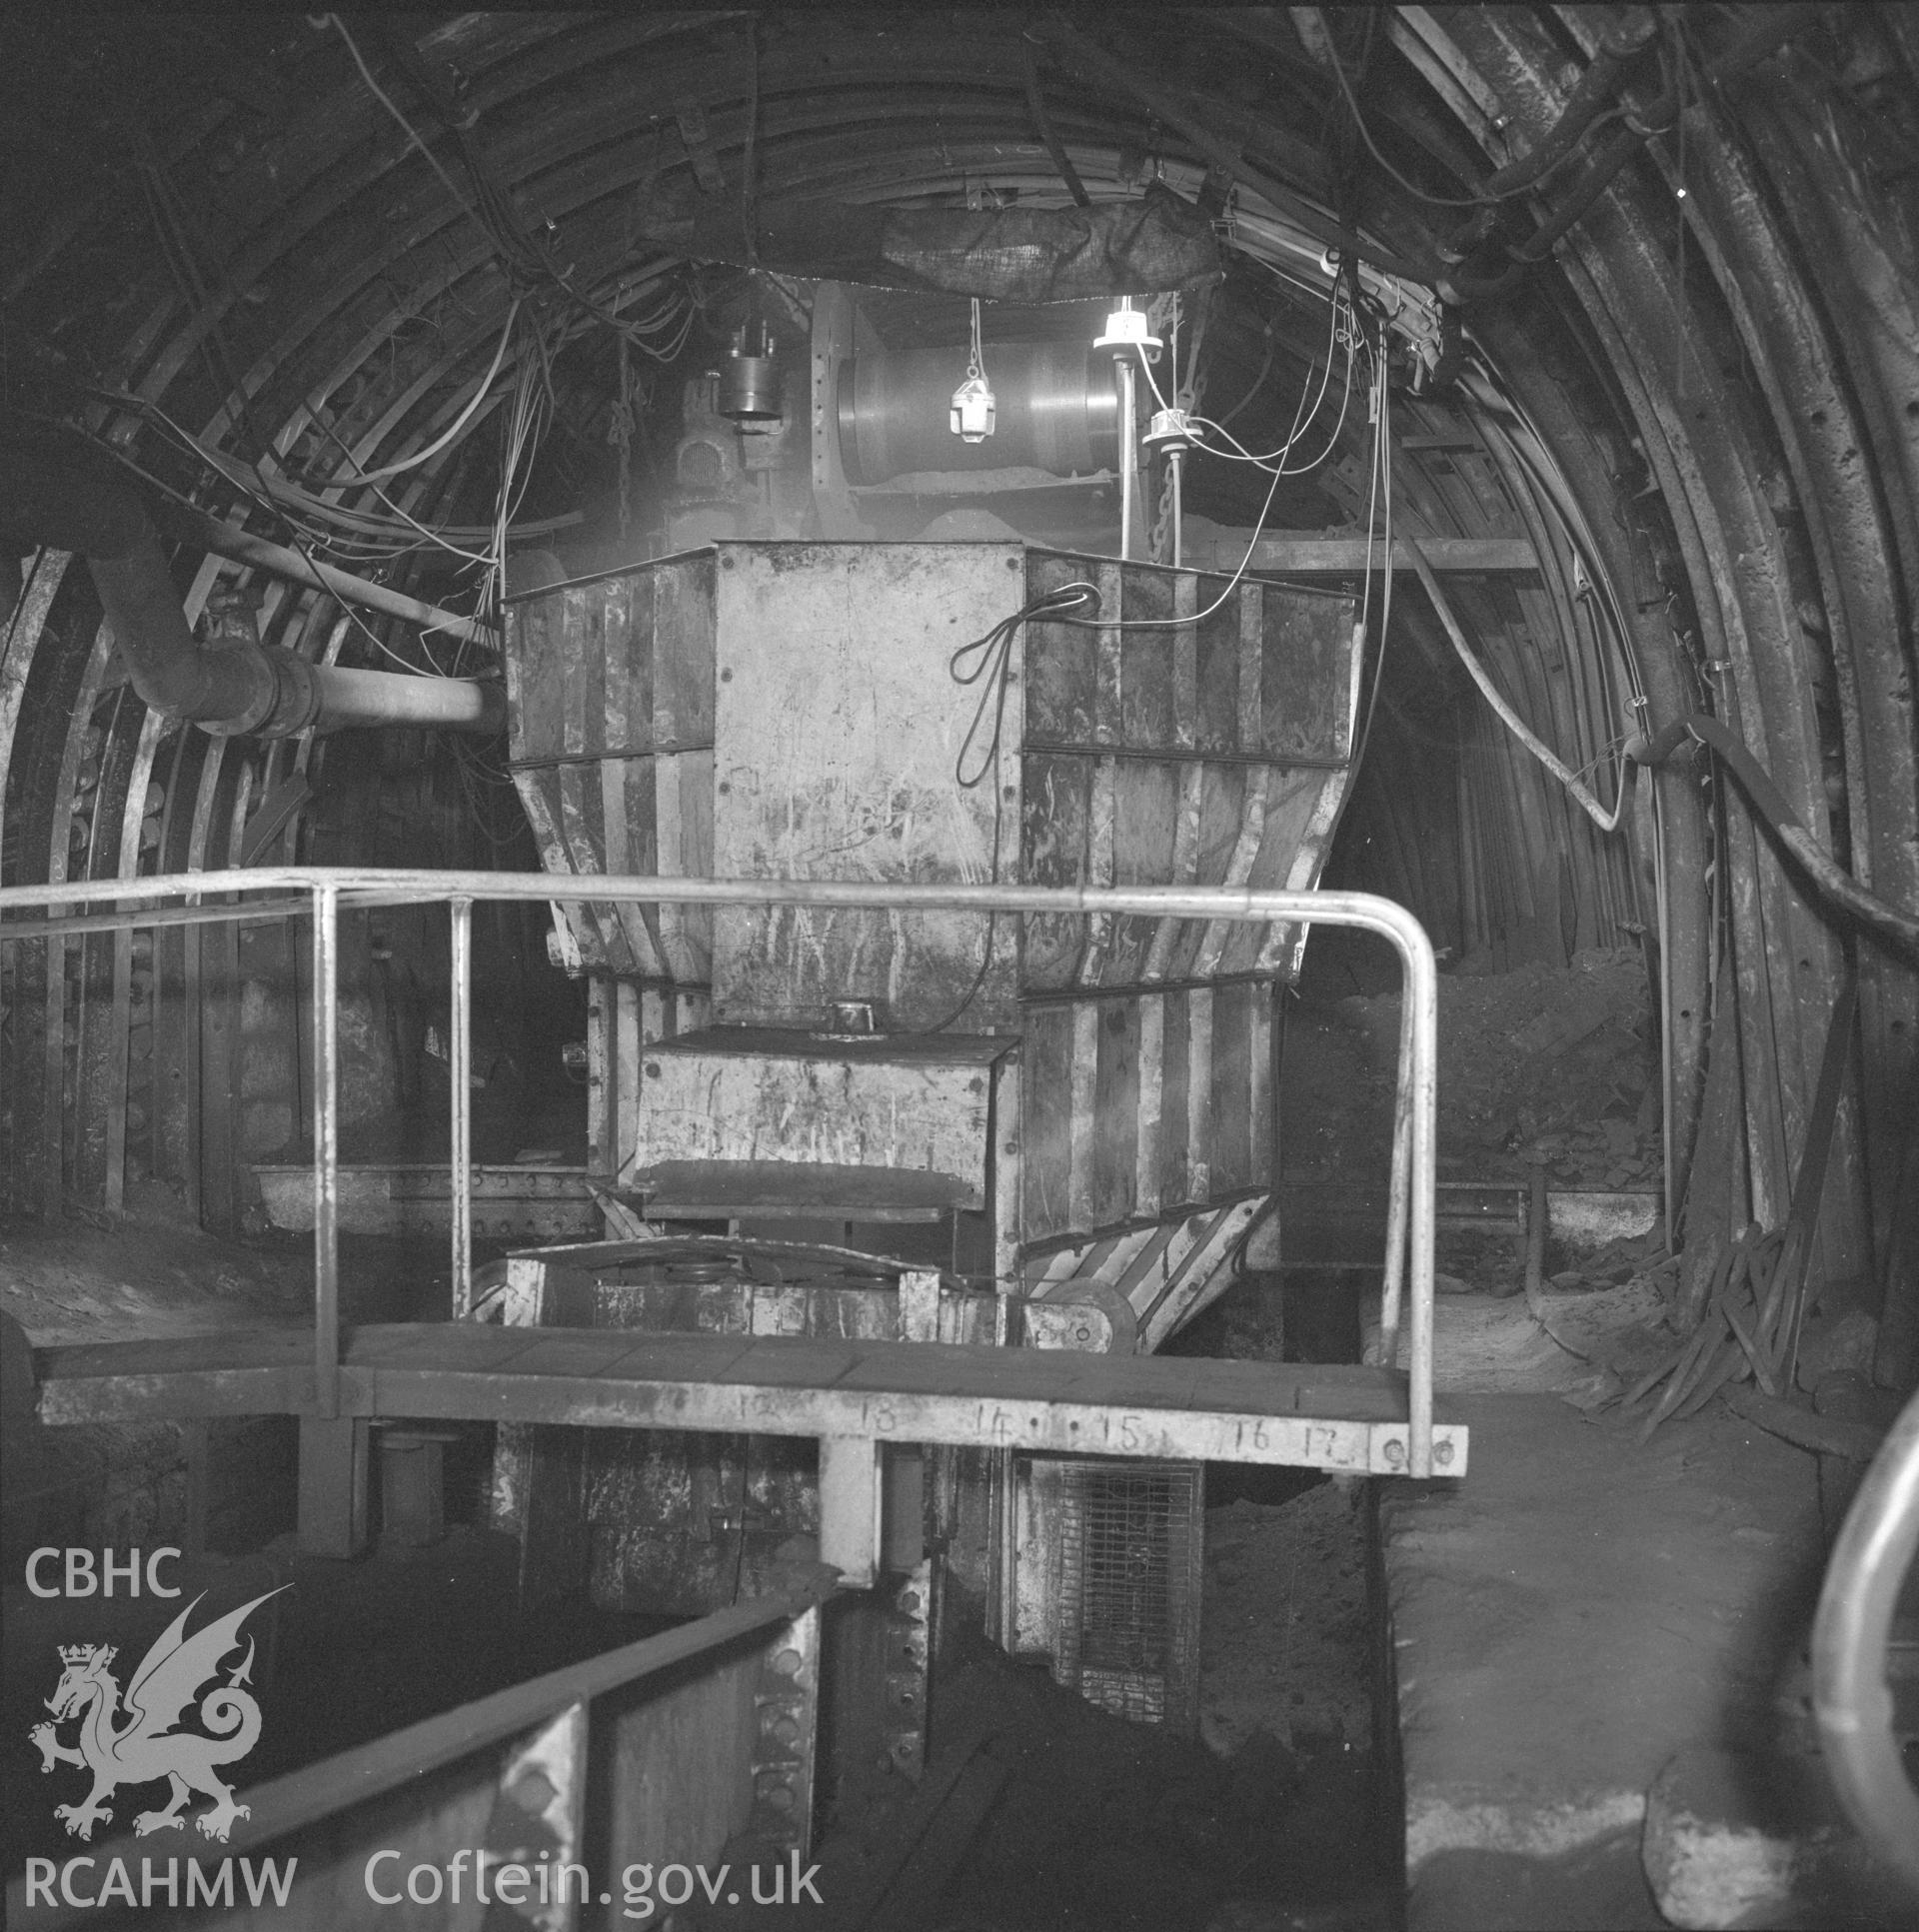 Digital copy of an acetate negative showing exterior of underground bunker at Oakdale Colliery, from the John Cornwell Collection.